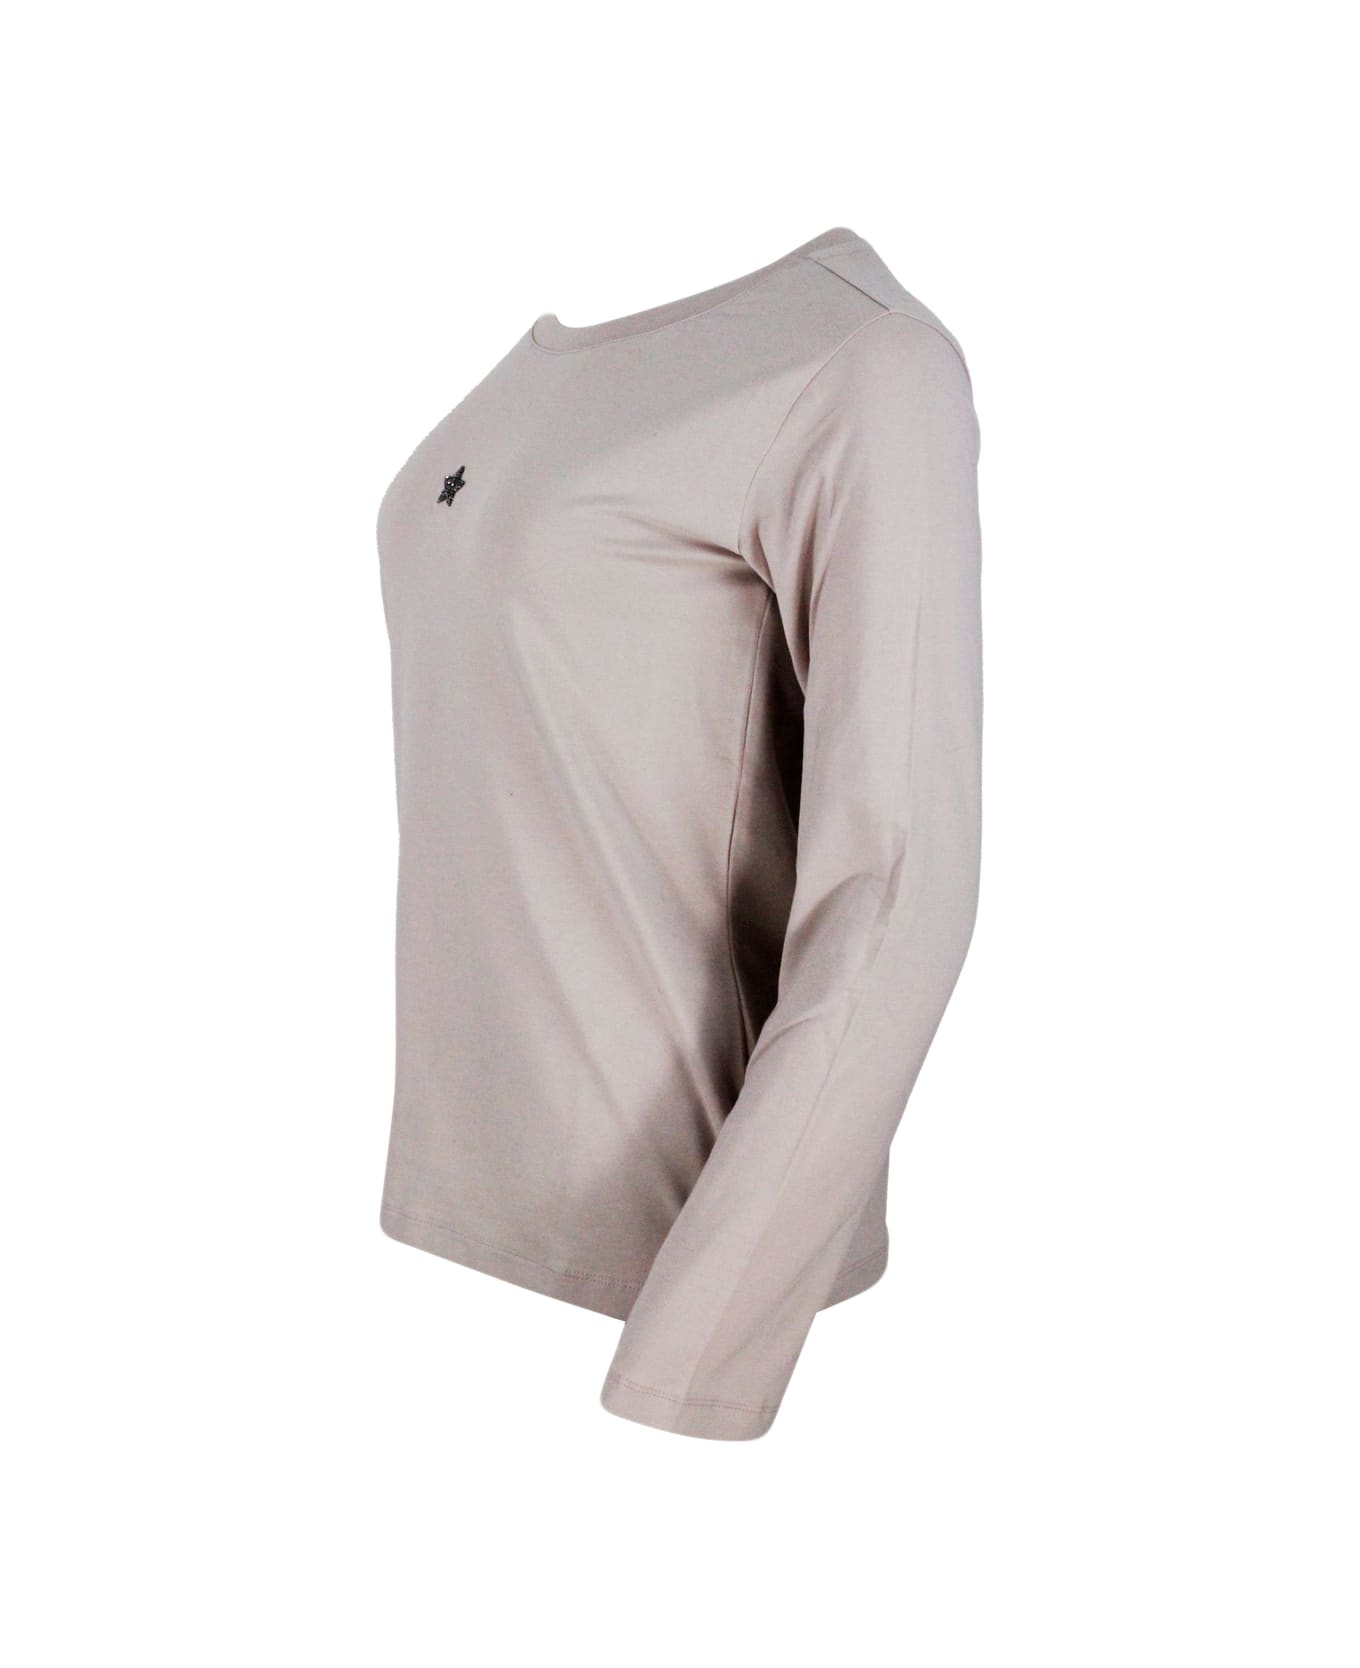 Lorena Antoniazzi Long-sleeved Crew-neck T-shirt In Stretch Cotton With Swarosky Star On The Chest - Pink